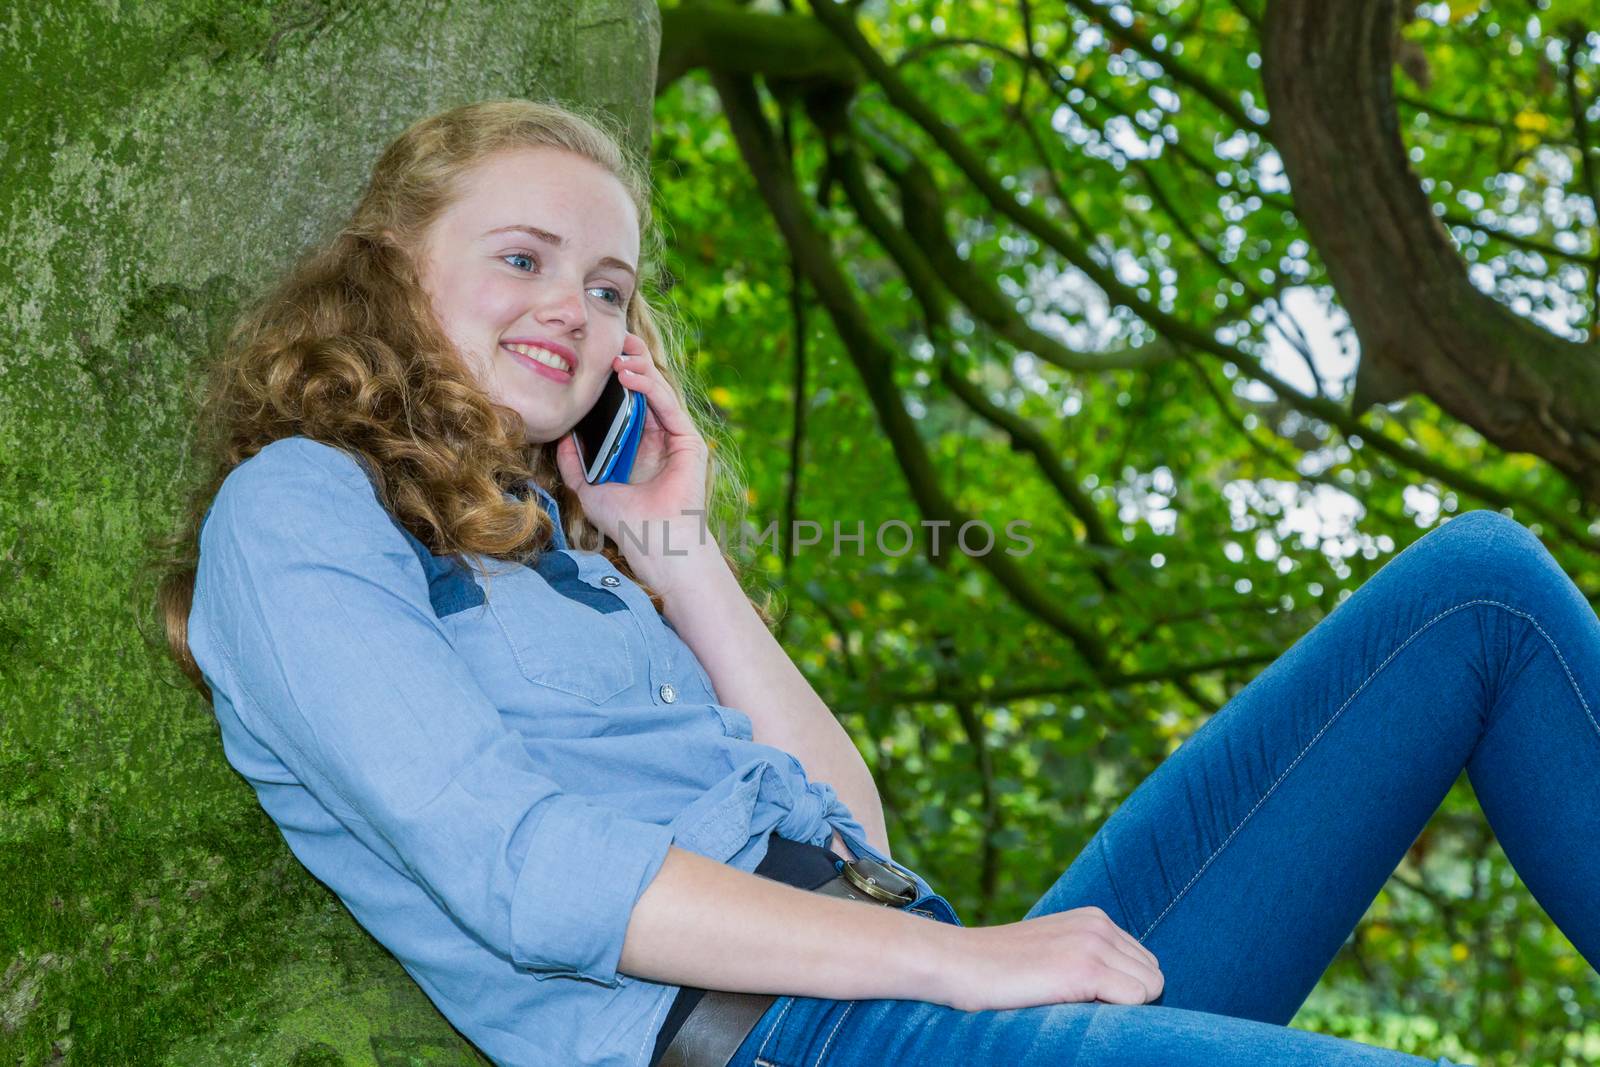 Dutch teenage girl phoning mobile in green tree by BenSchonewille